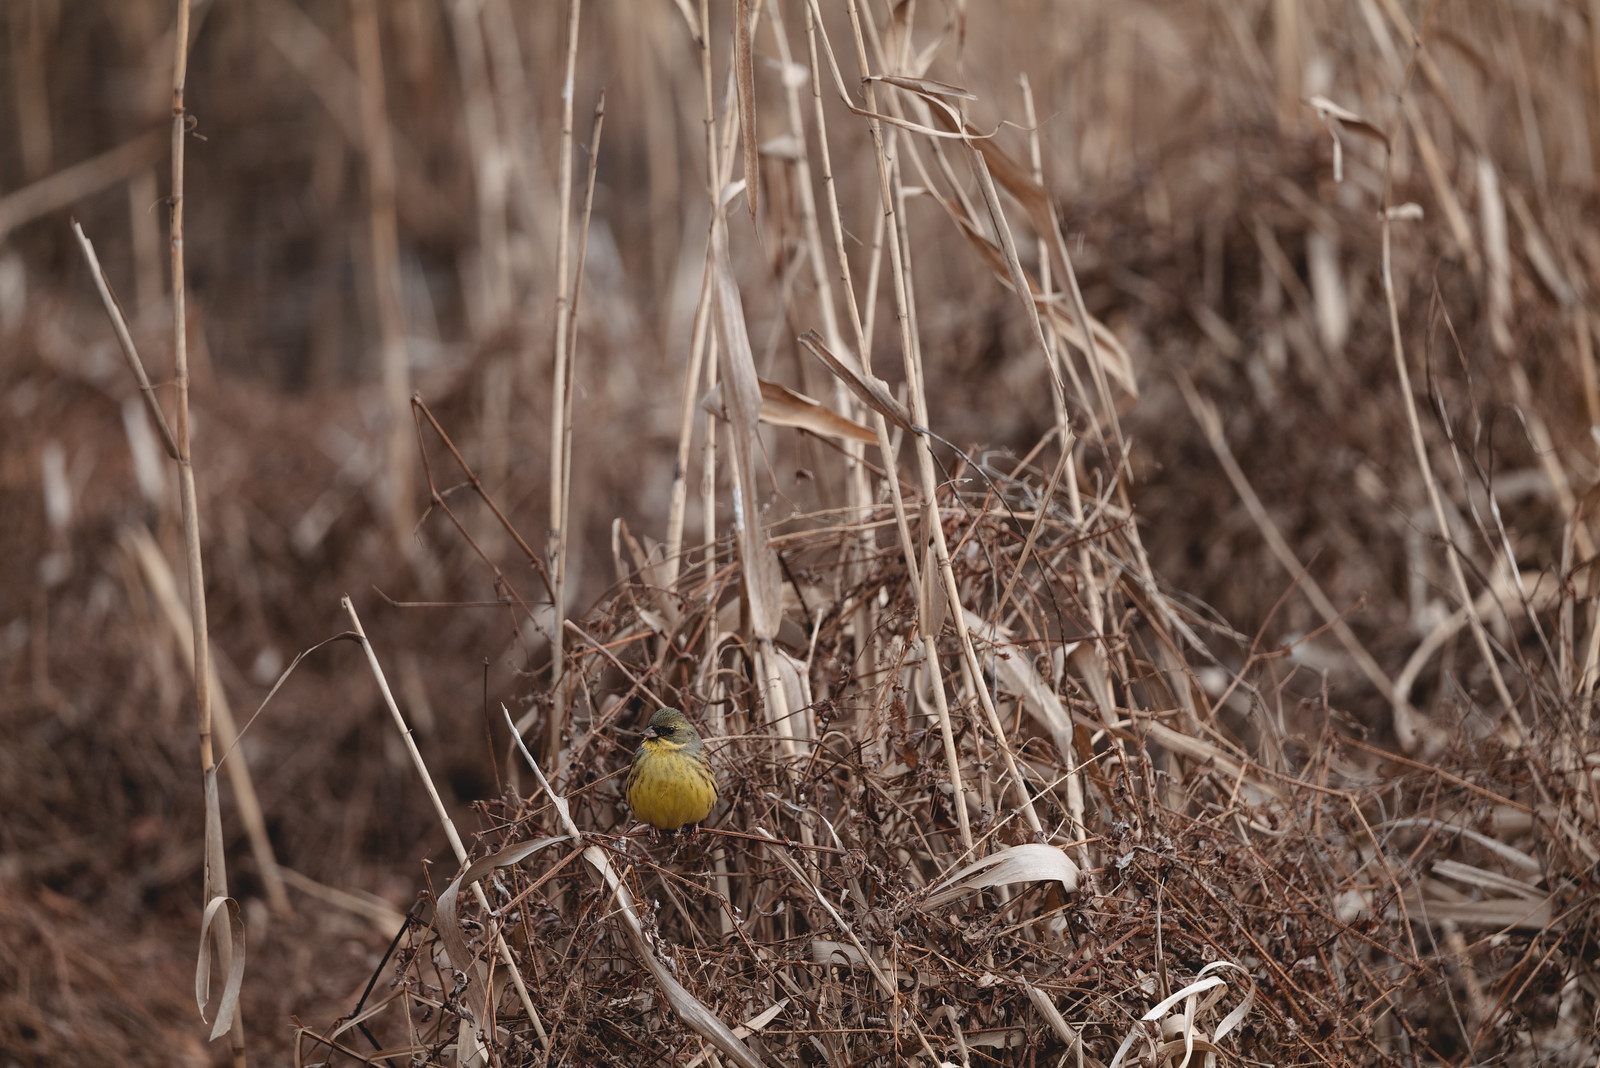 Black-faced bunting